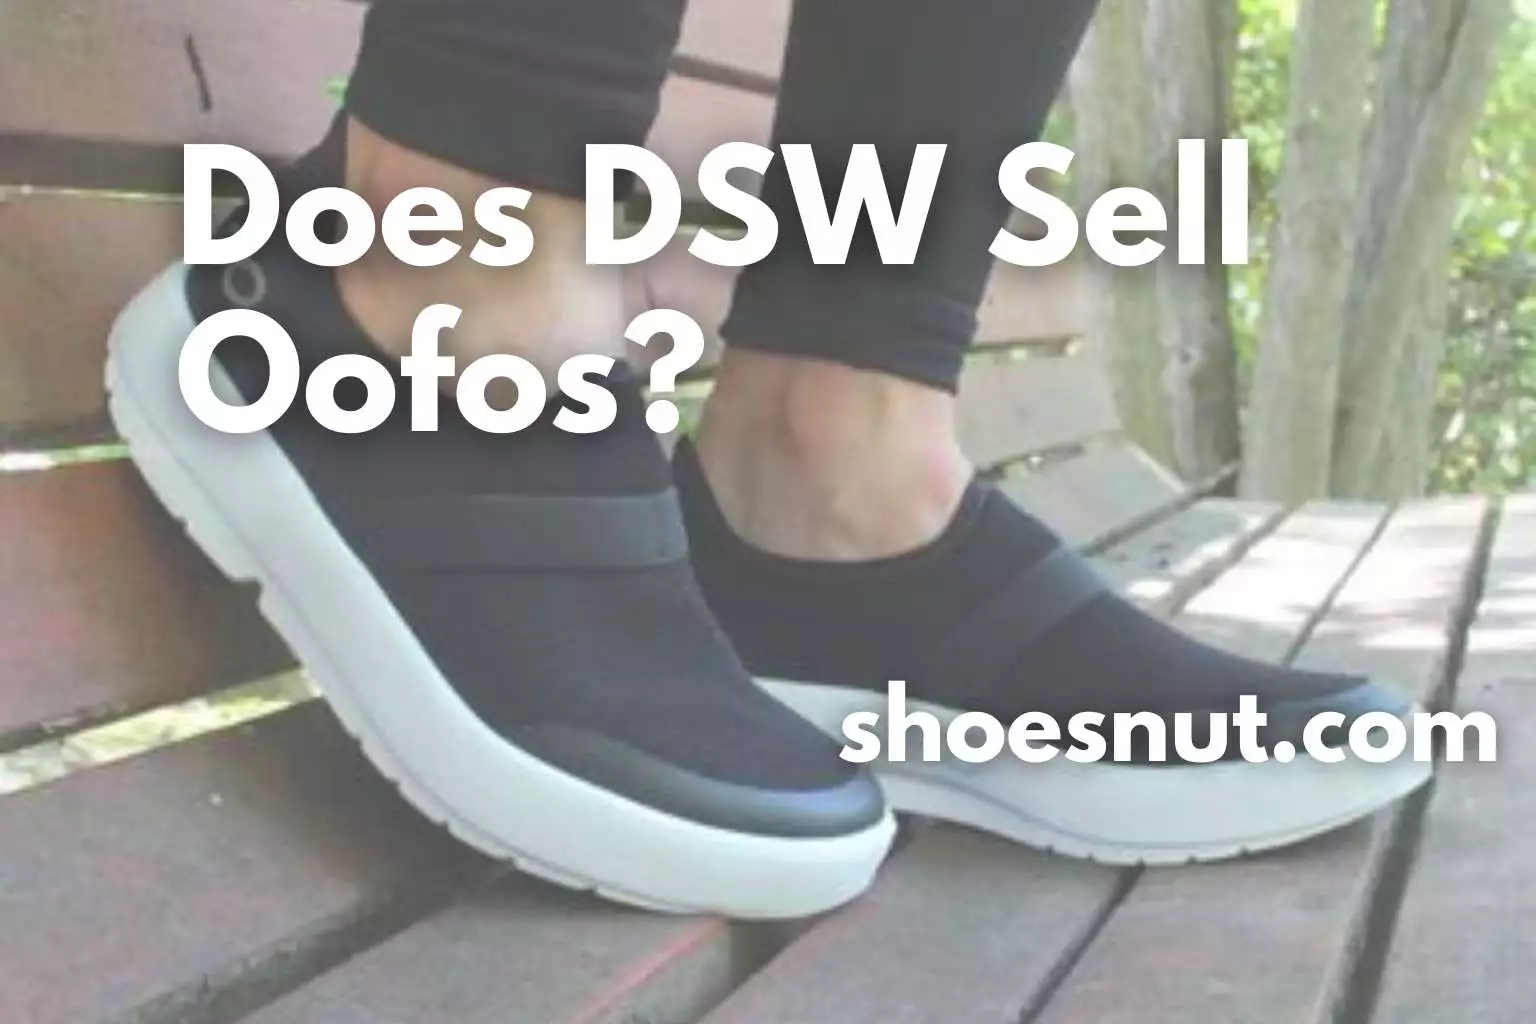 Does DSW Sell Oofos?